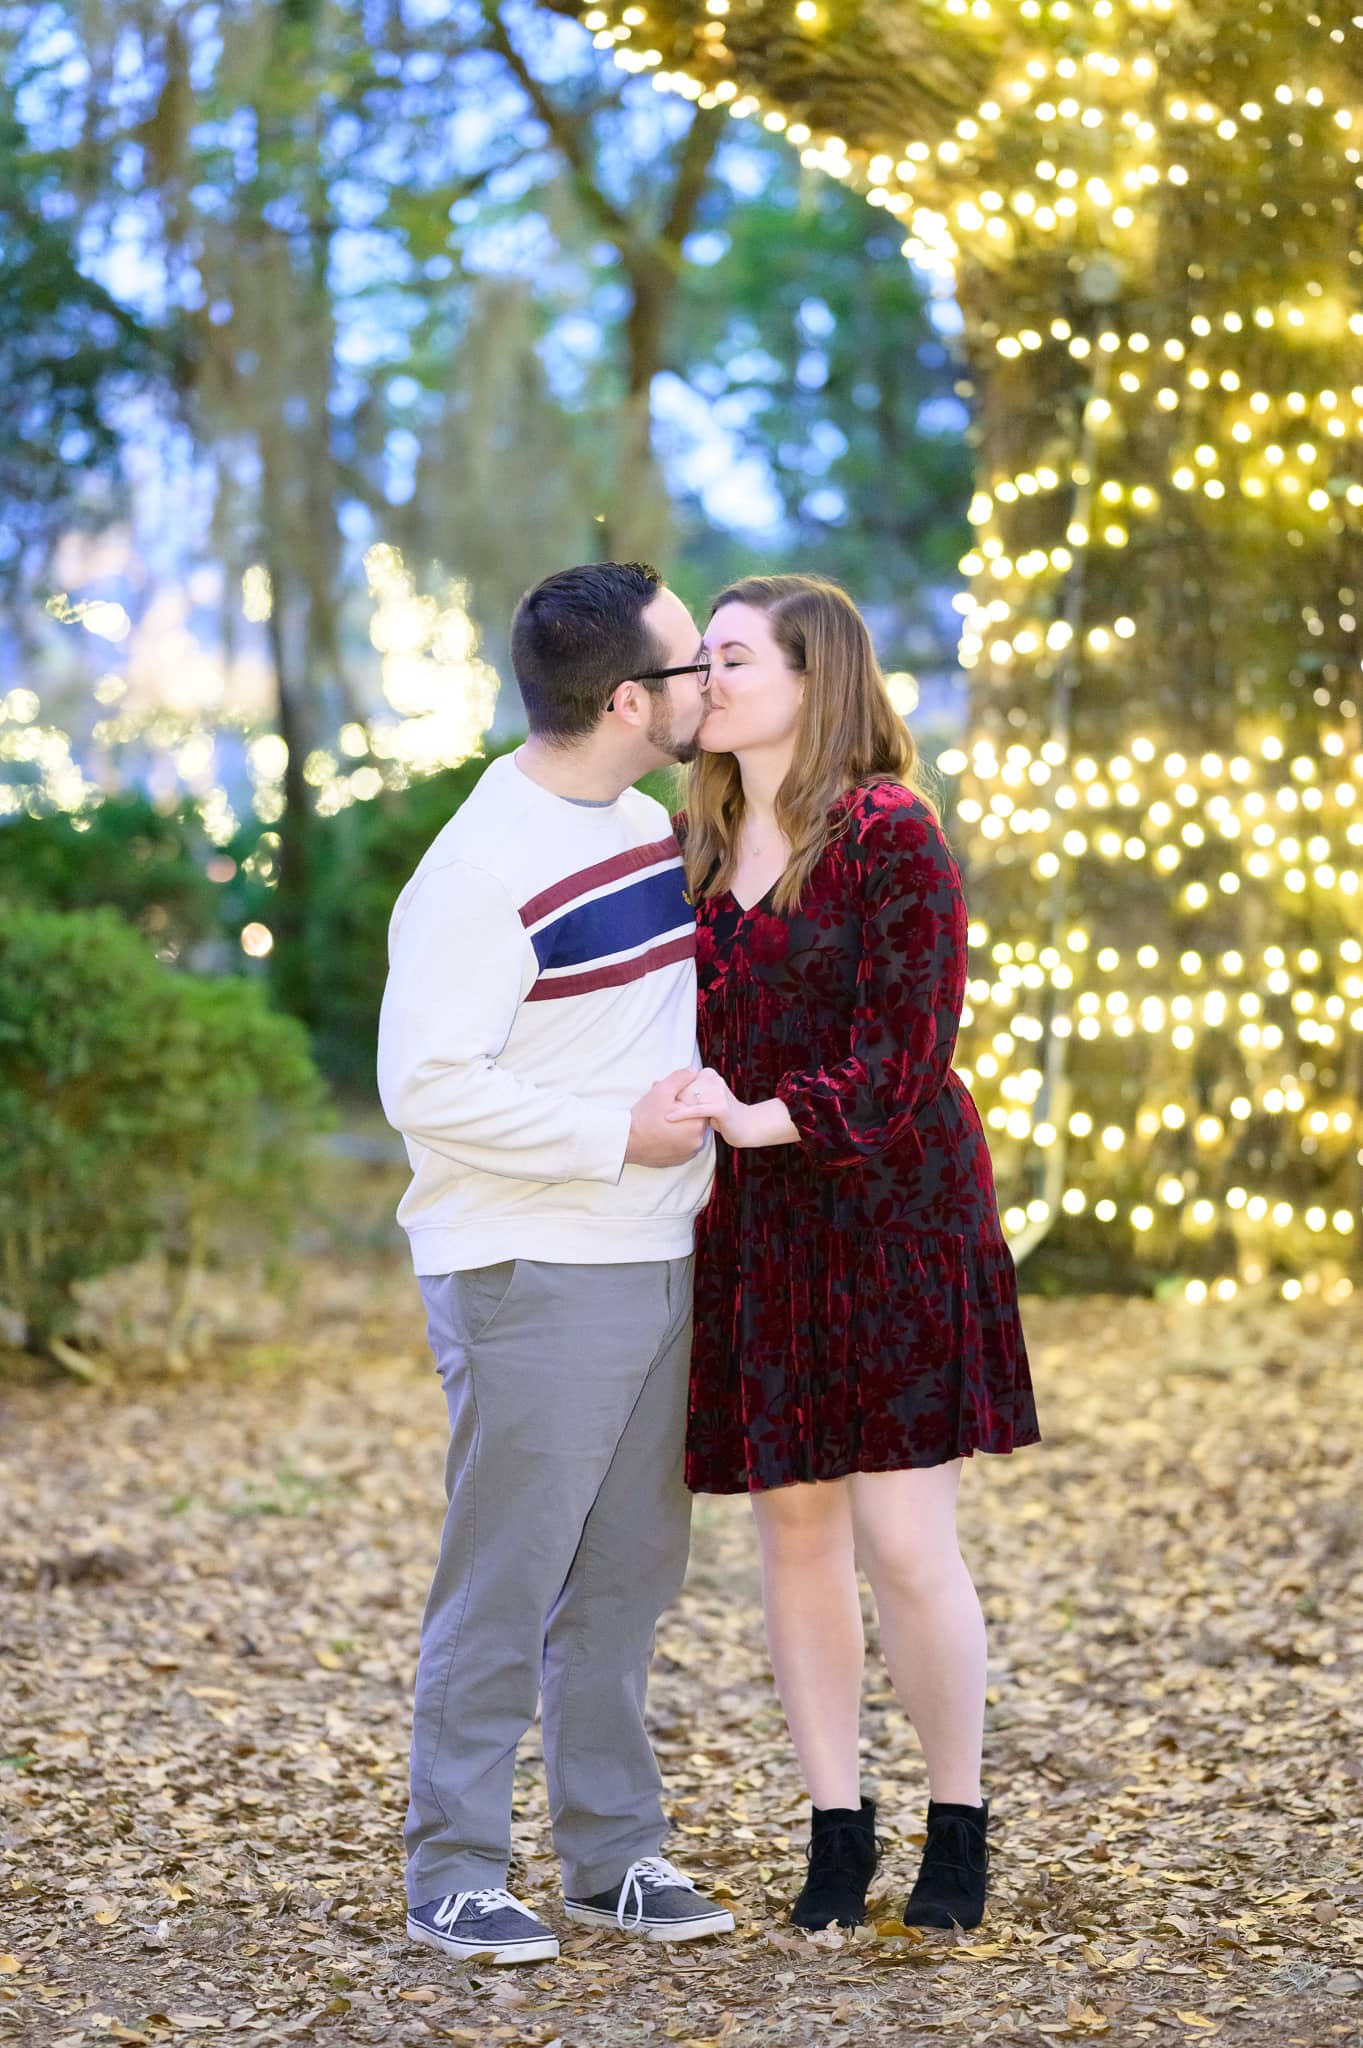 Kiss by the tree covered in lights - Brookgreen Gardens